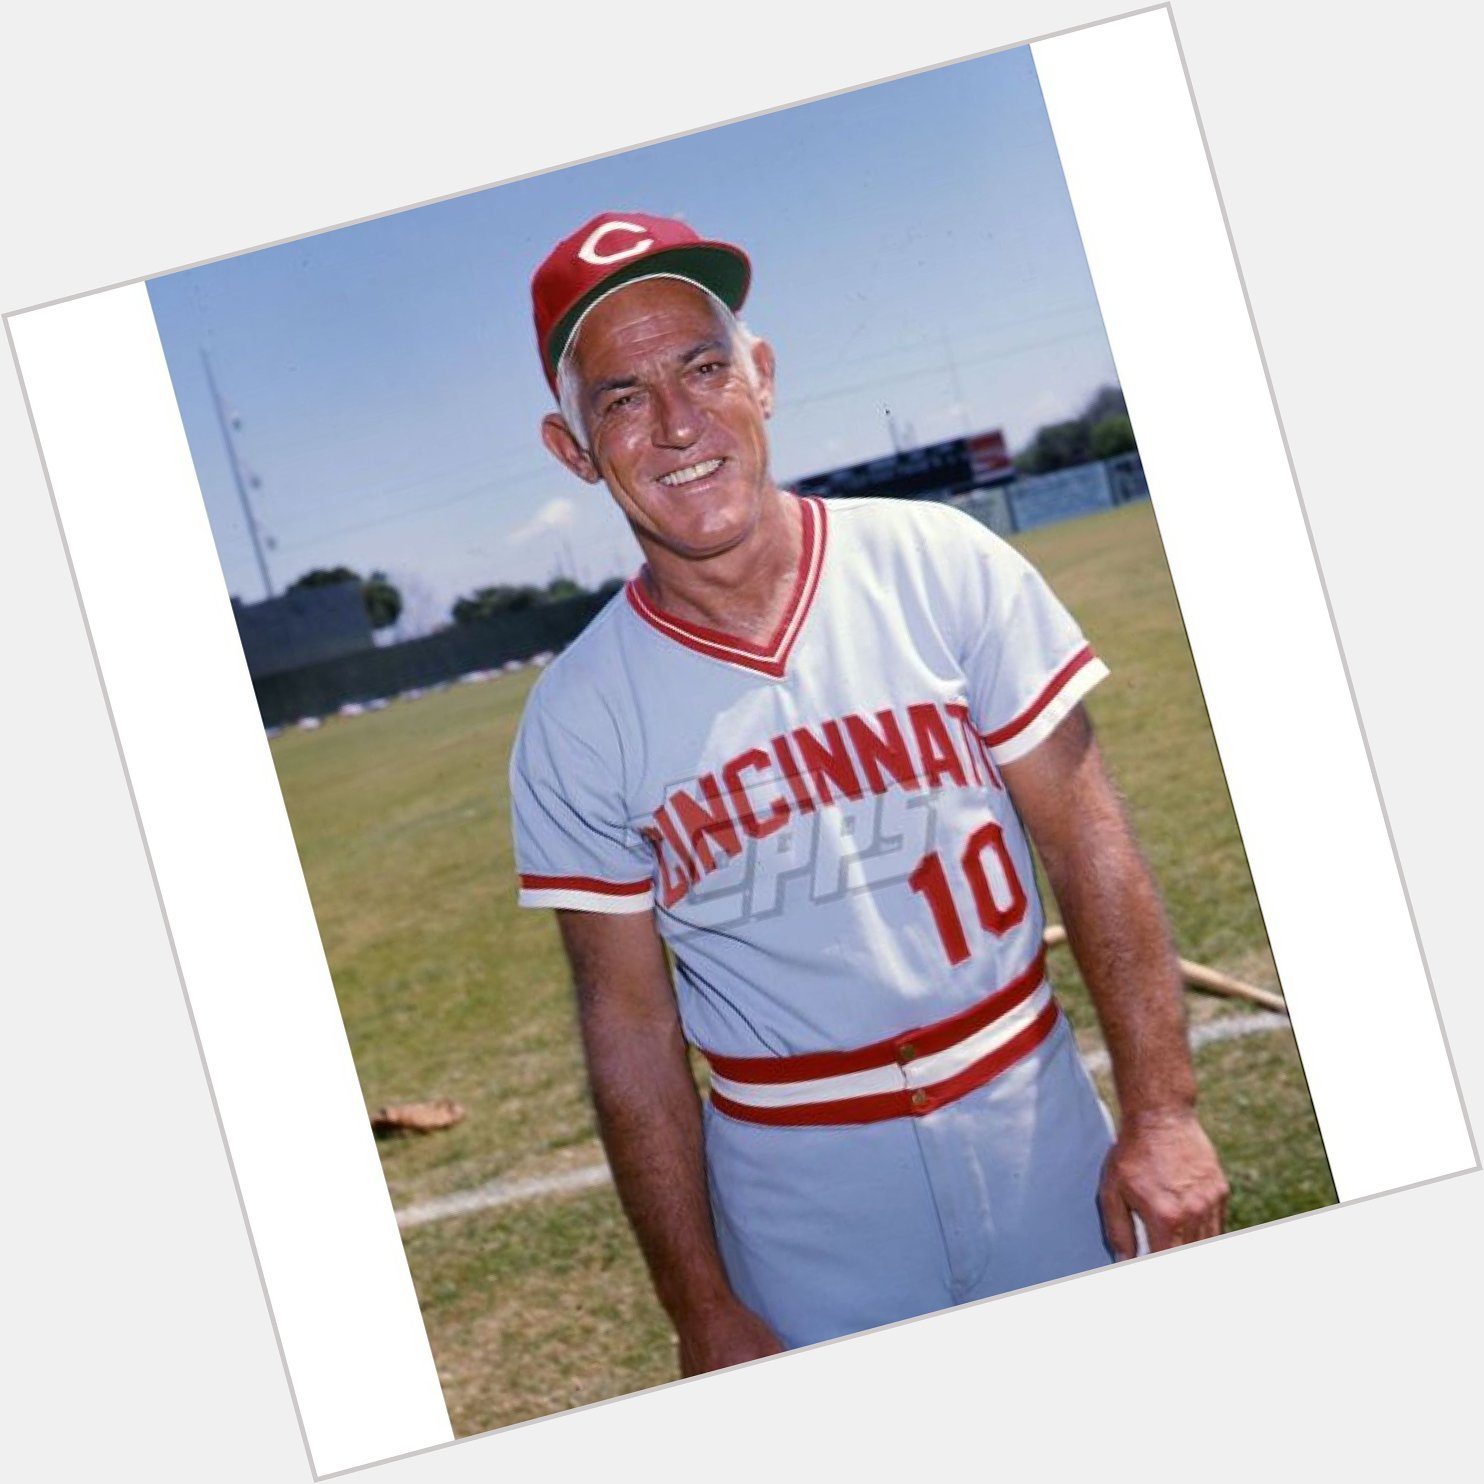 Happy birthday to Sparky Anderson! In these 2 pictures, one of these guys is 14 years older than the other. 